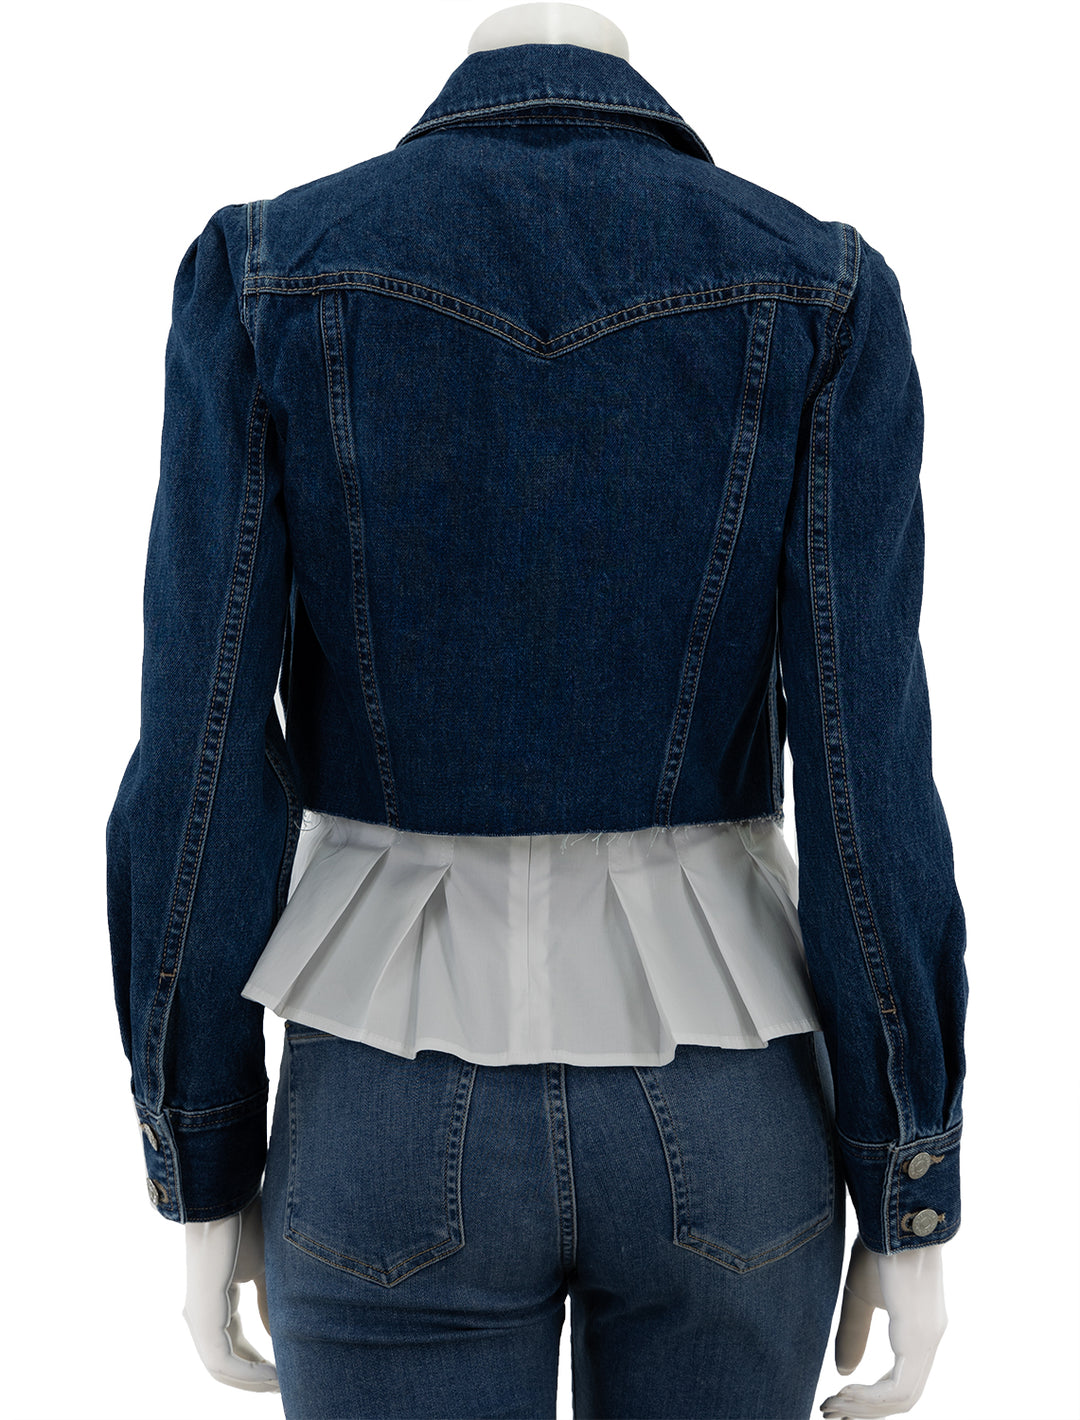 Back view of Veronica Beard's sweeney jacket in second chance wash.